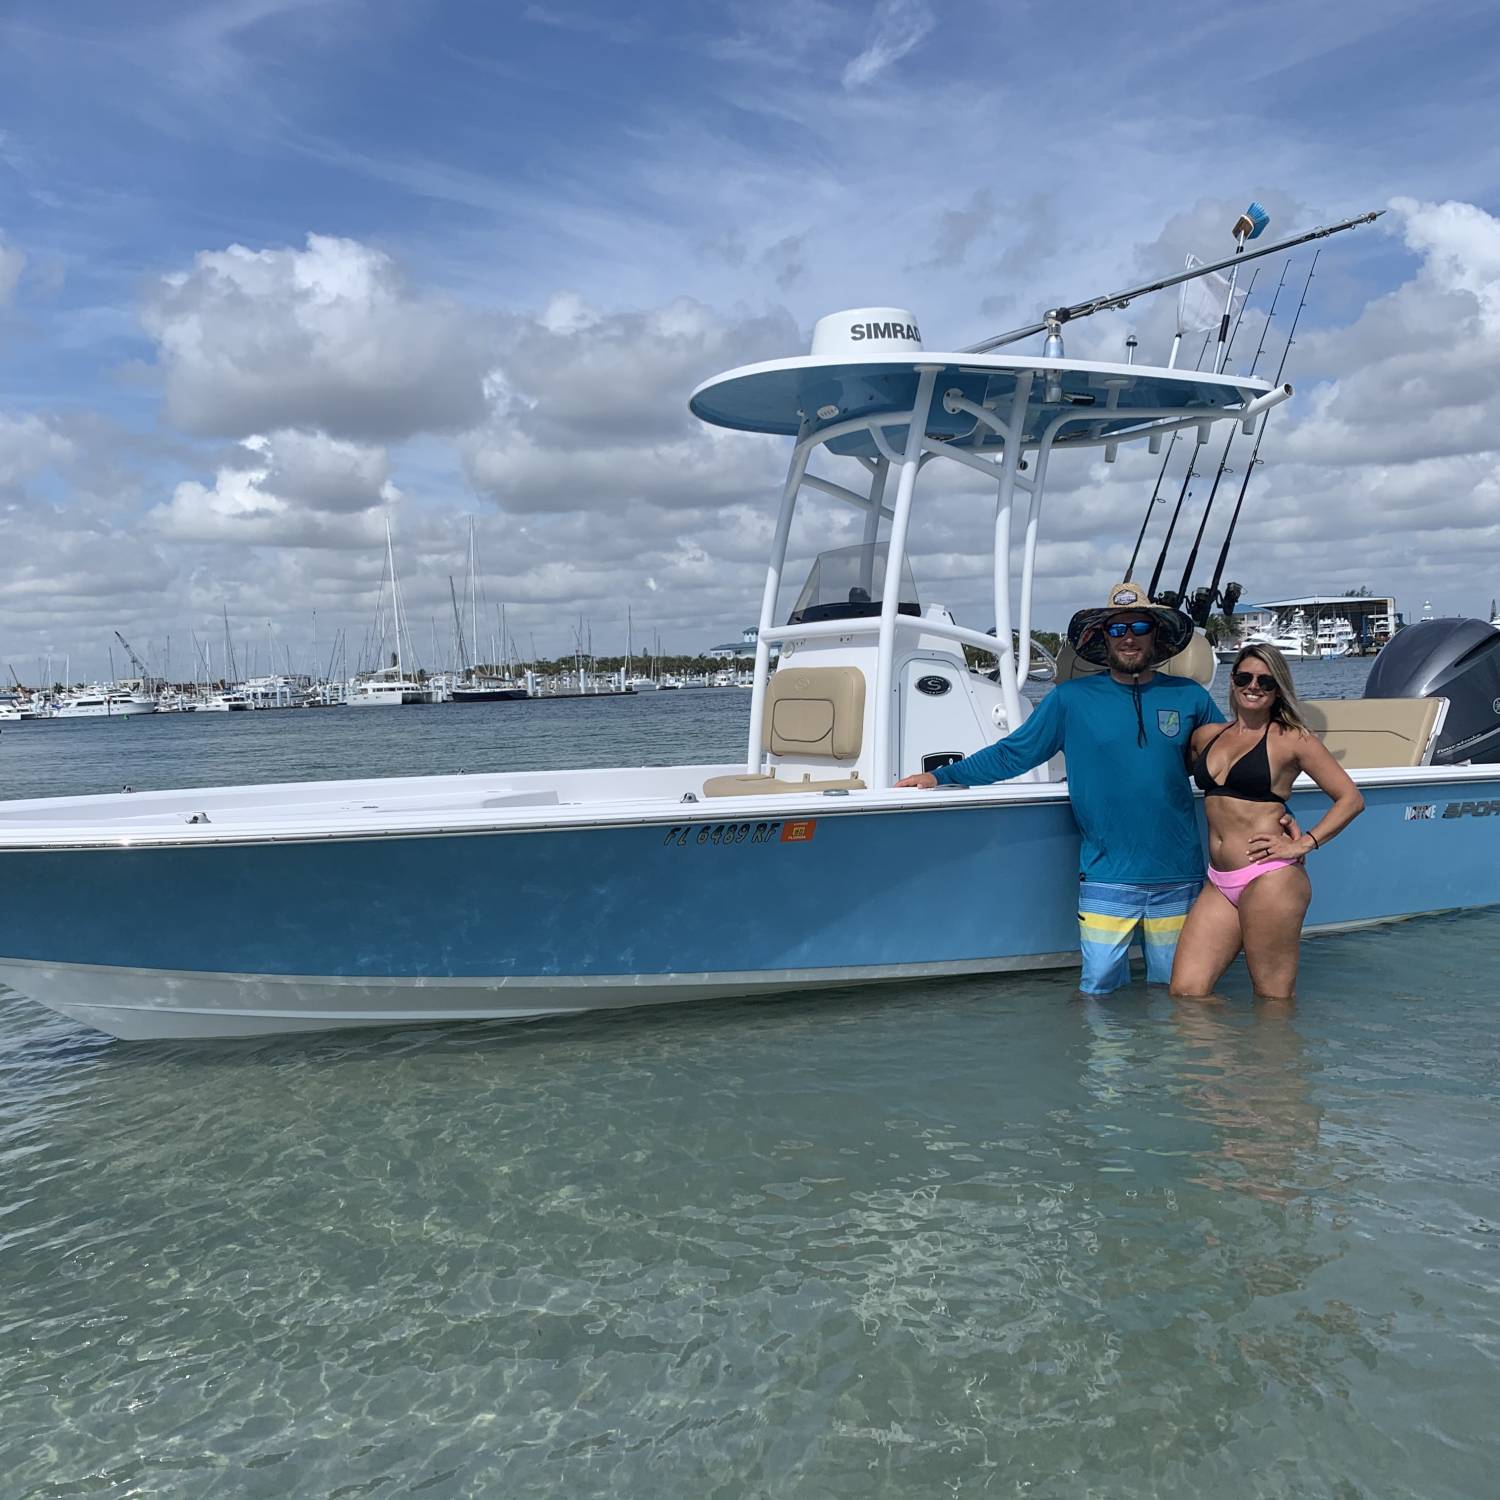 Title: Sunday Funday - On board their Sportsman Masters 247 Bay Boat - Location: Singer Island, Florida. Participating in the Photo Contest #SportsmanJuly